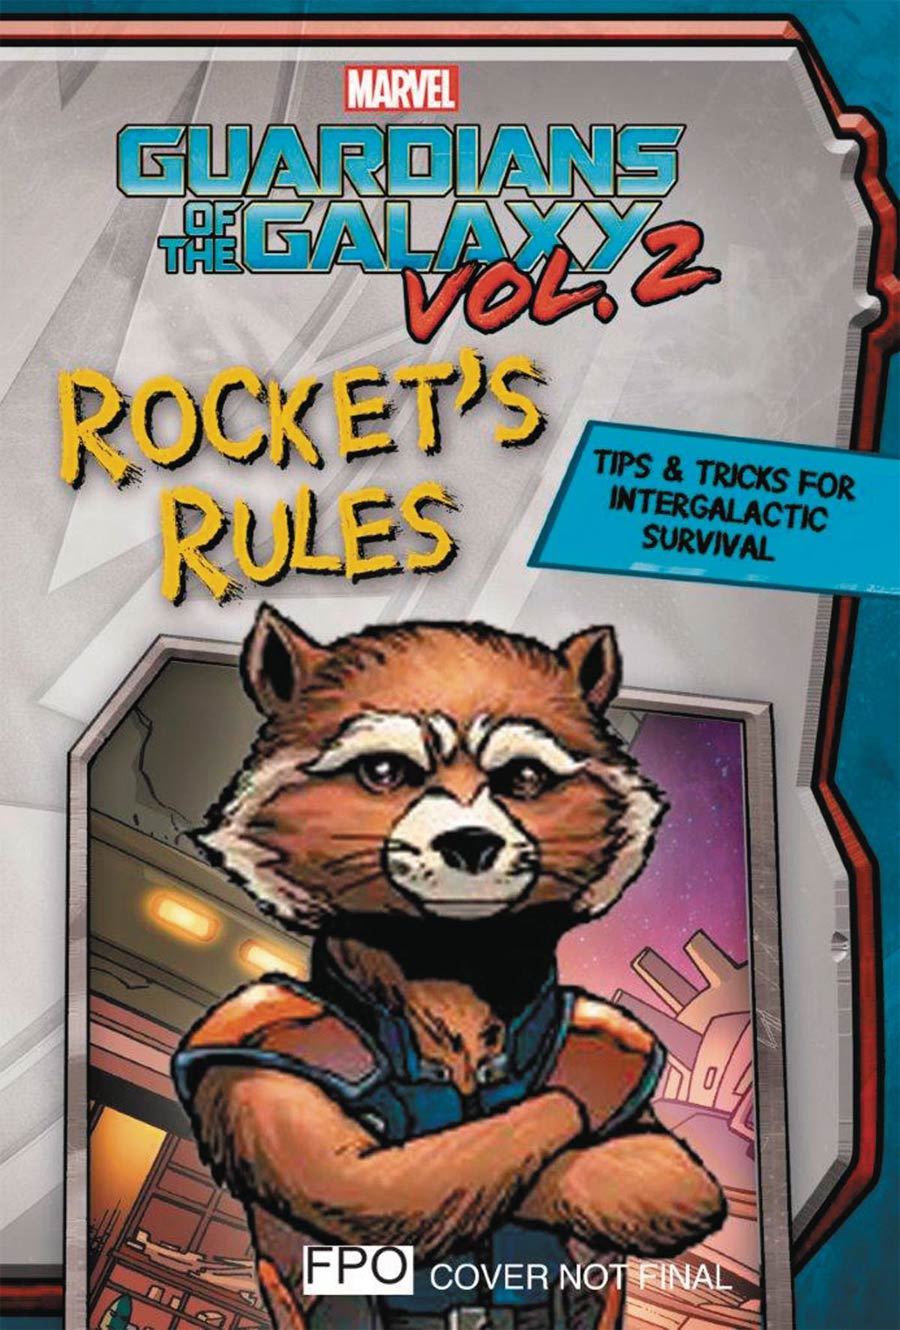 Guardians Of The Galaxy Vol 2 Rockets Rules Tips & Tricks For Intergalactic Survival HC